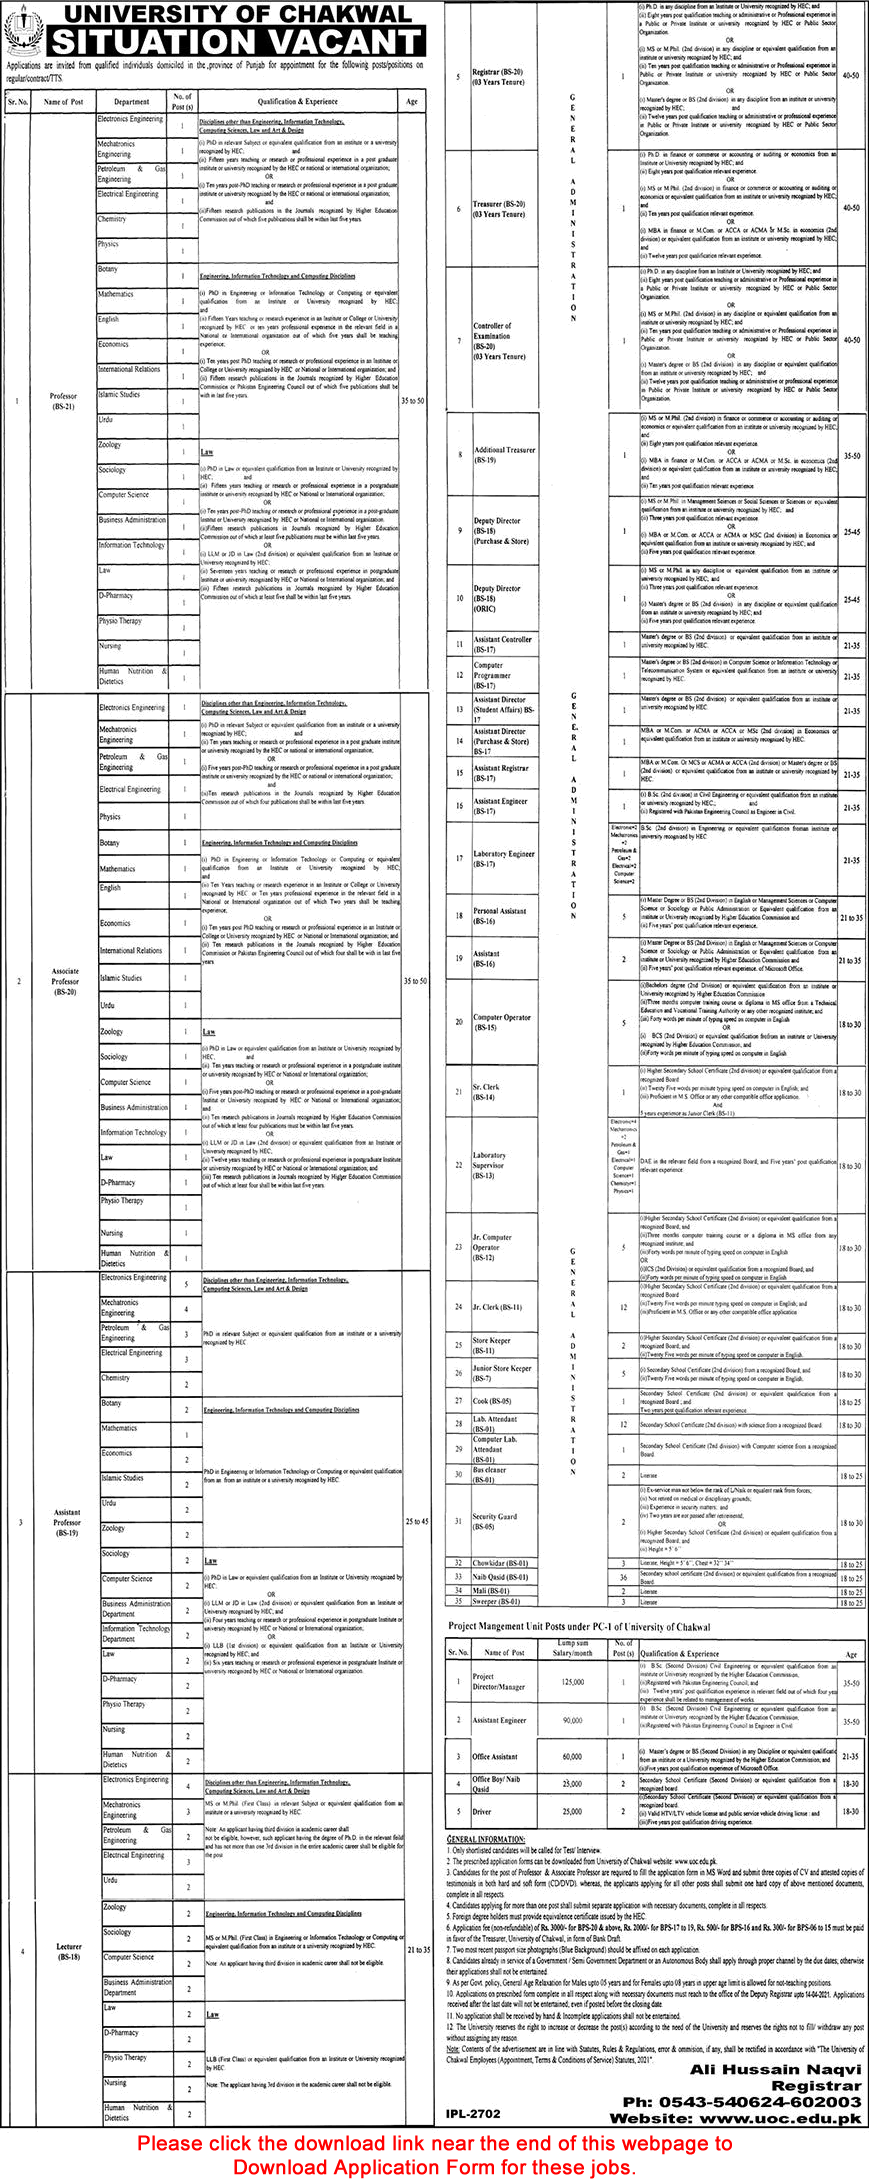 University of Chakwal Jobs 2021 March Application Form Teaching Faculty & Others Latest